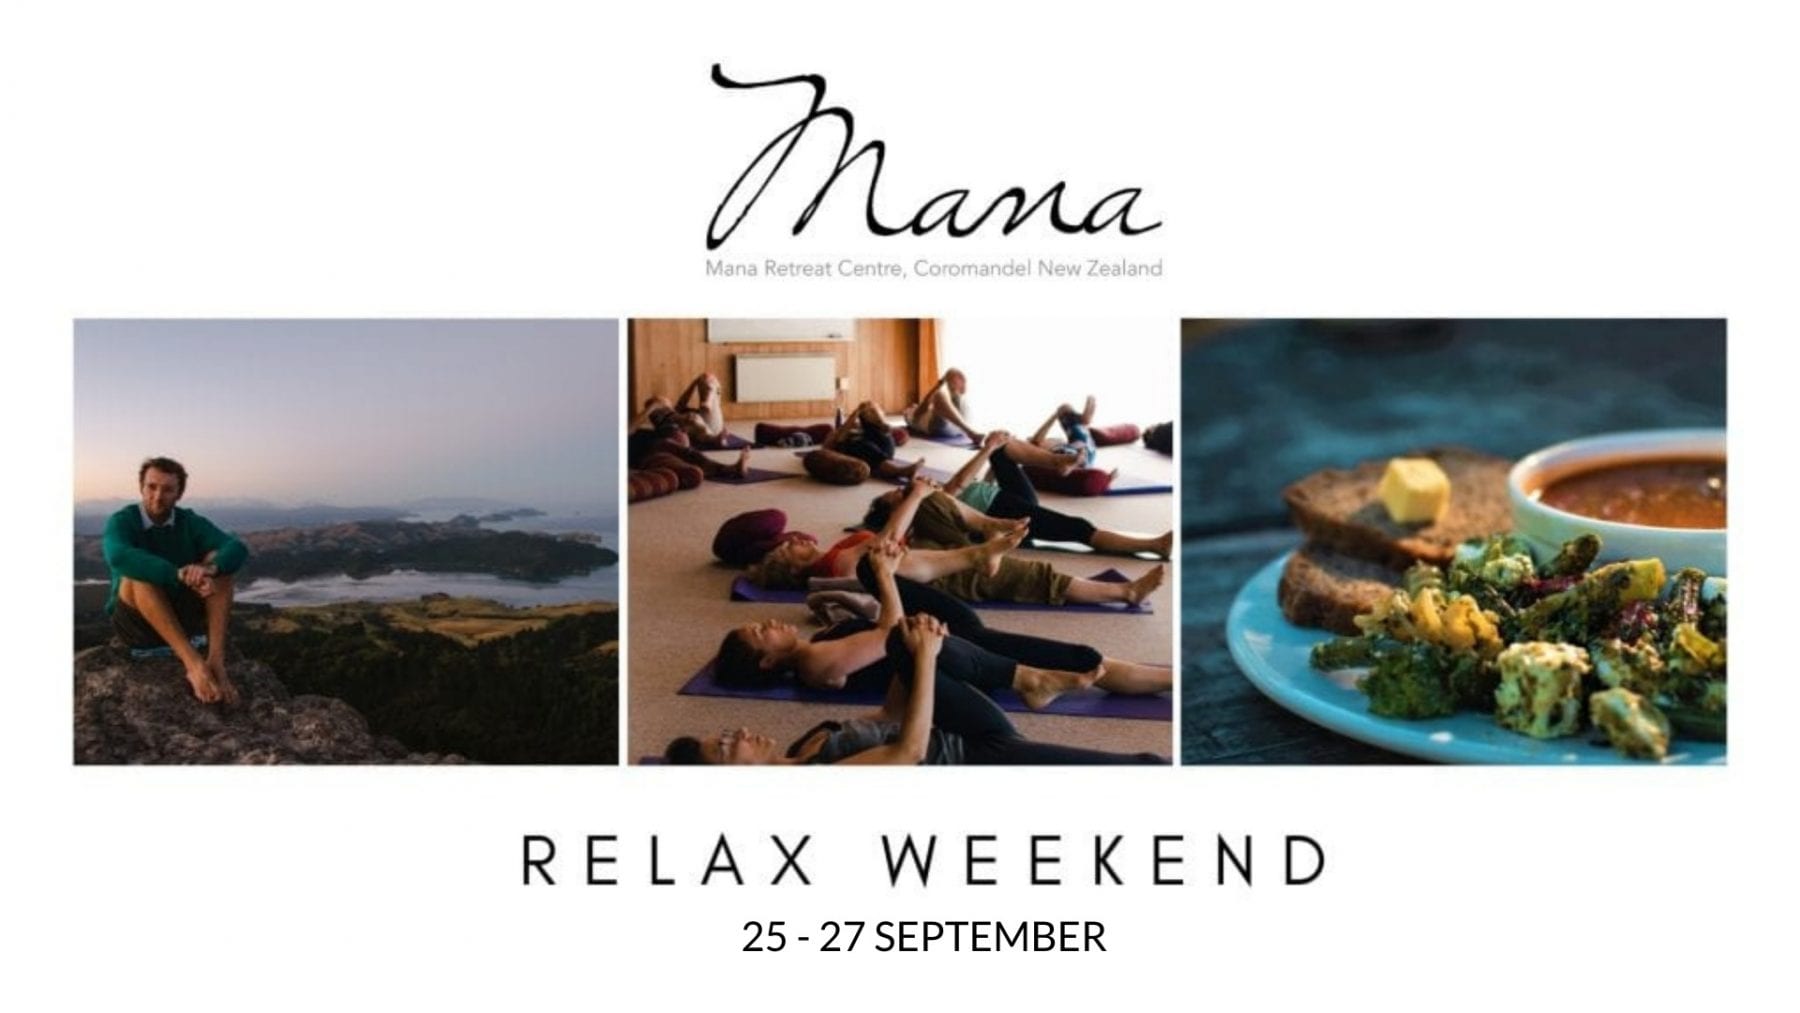 A promotional flier for the September Relax Weekend at Mana Retreat Centre